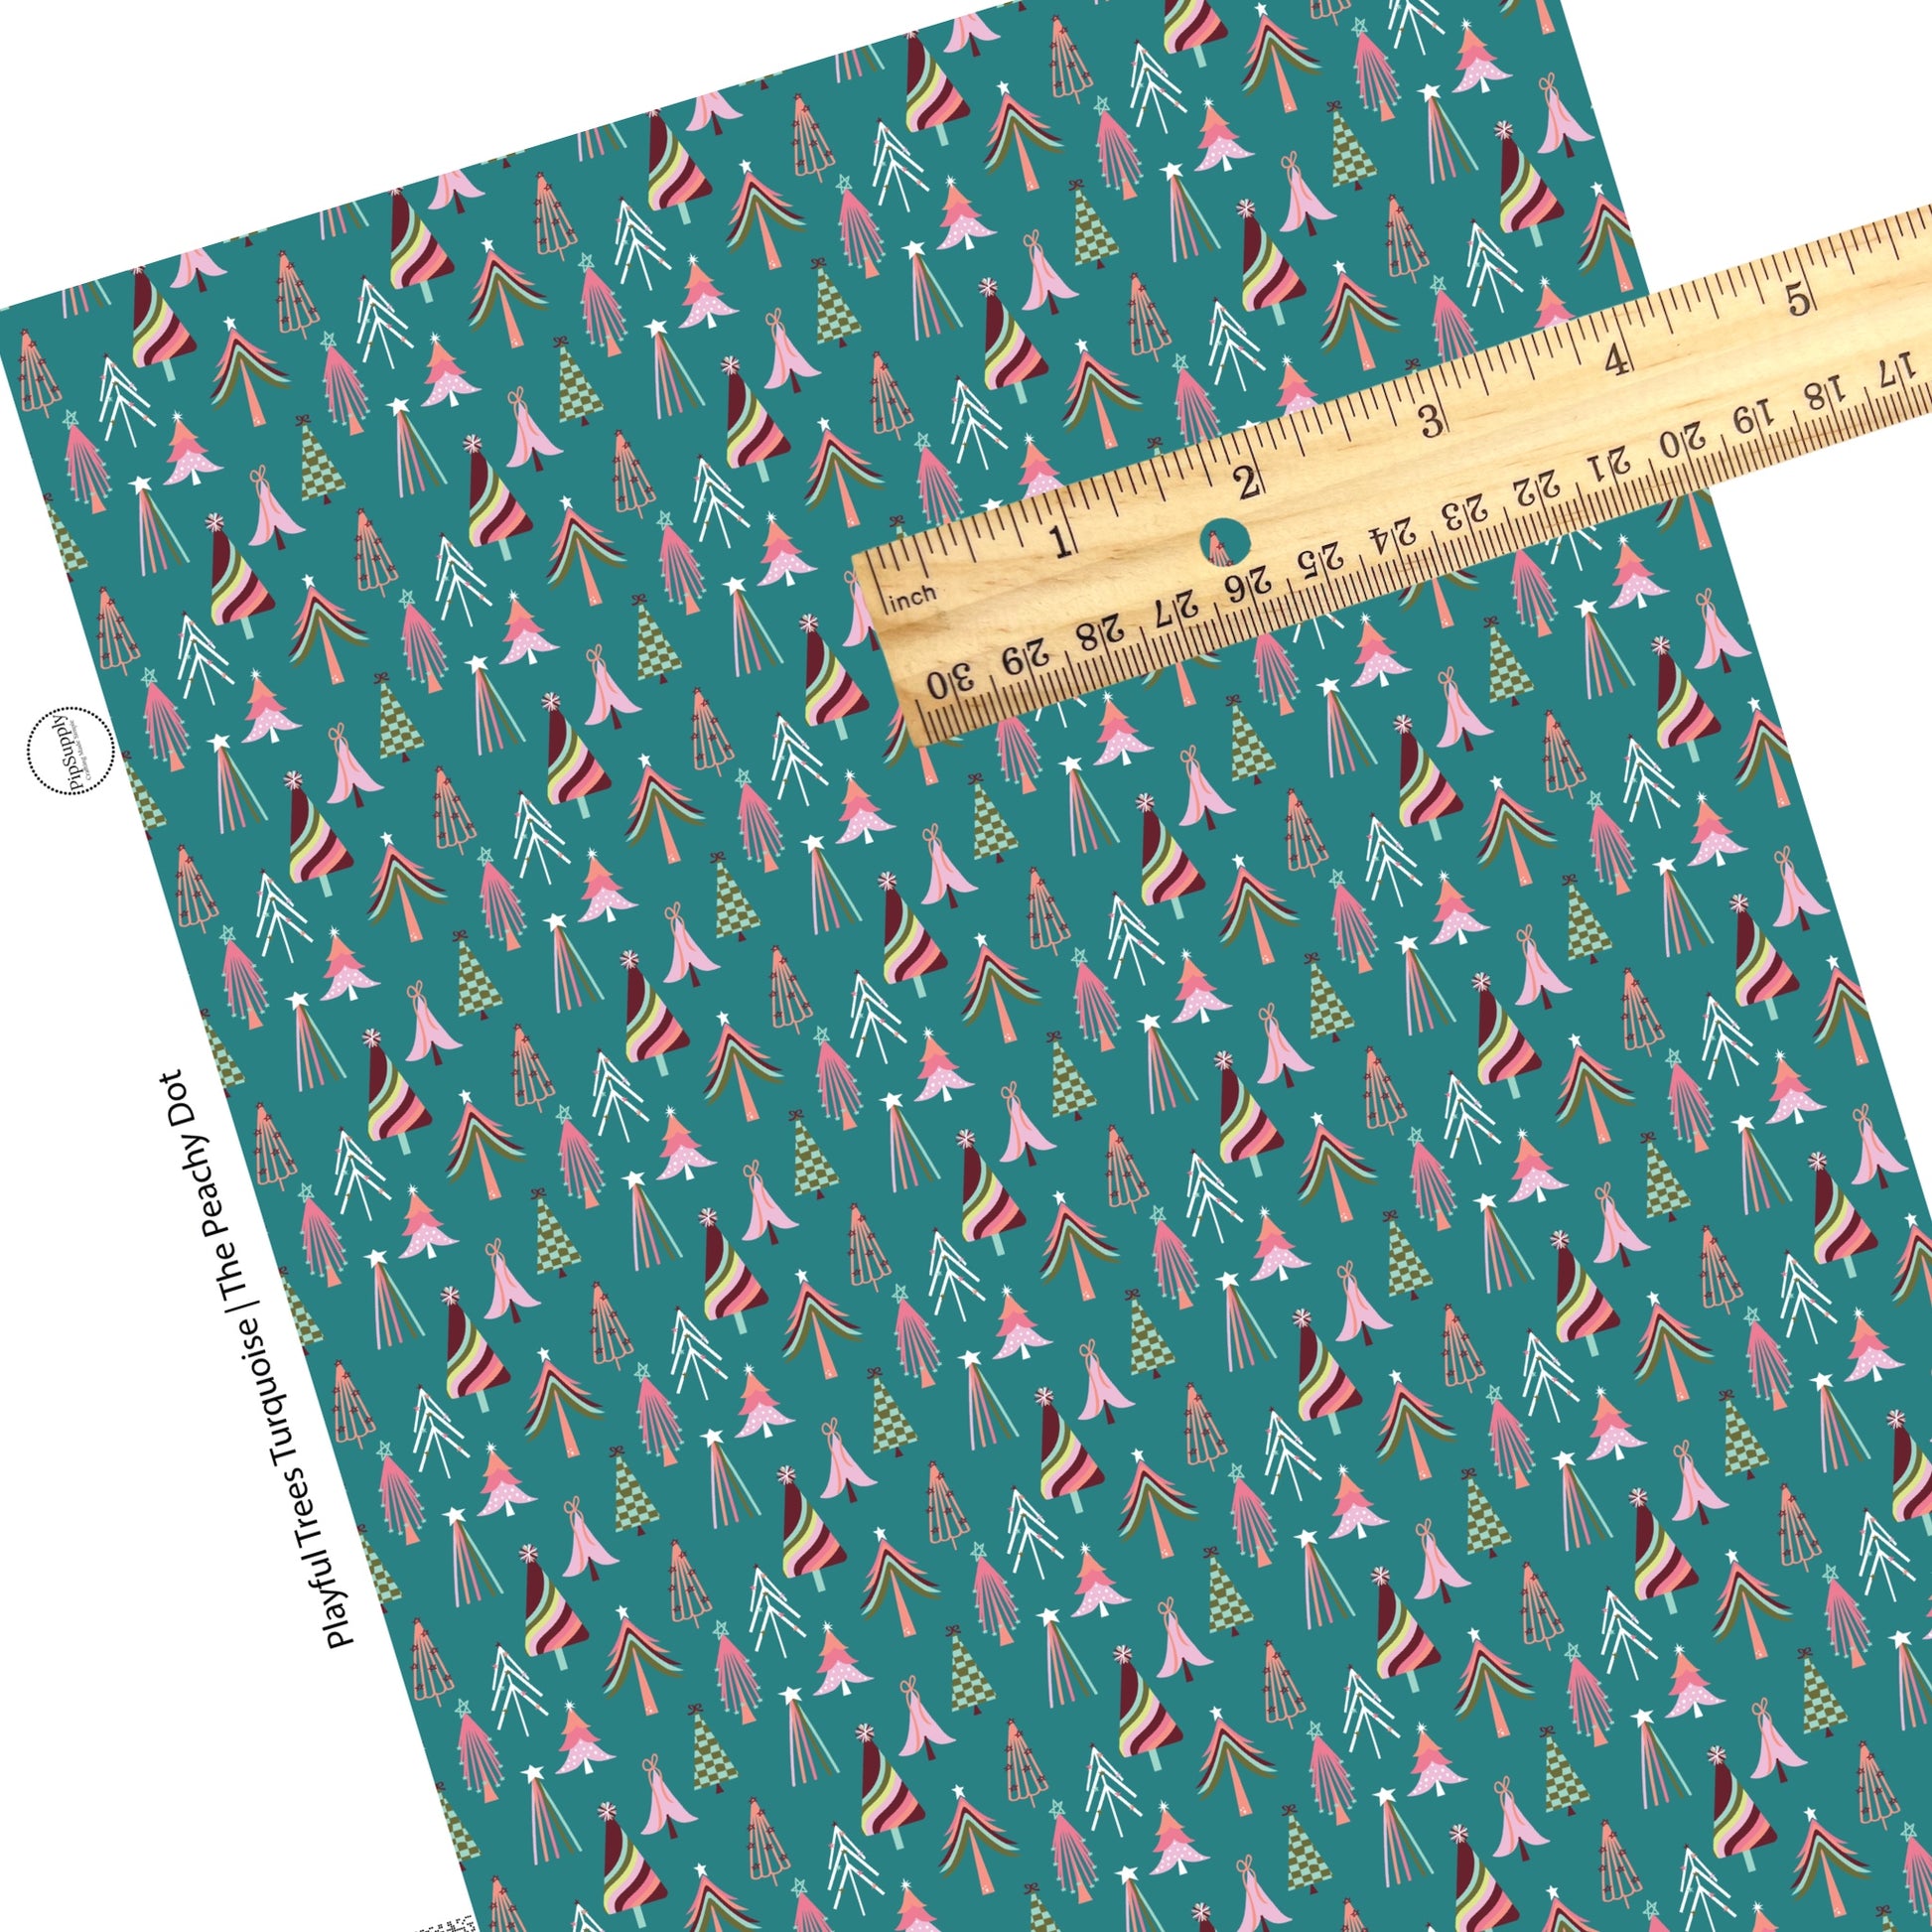 Multi patterned christmas trees on turquoise faux leather sheets